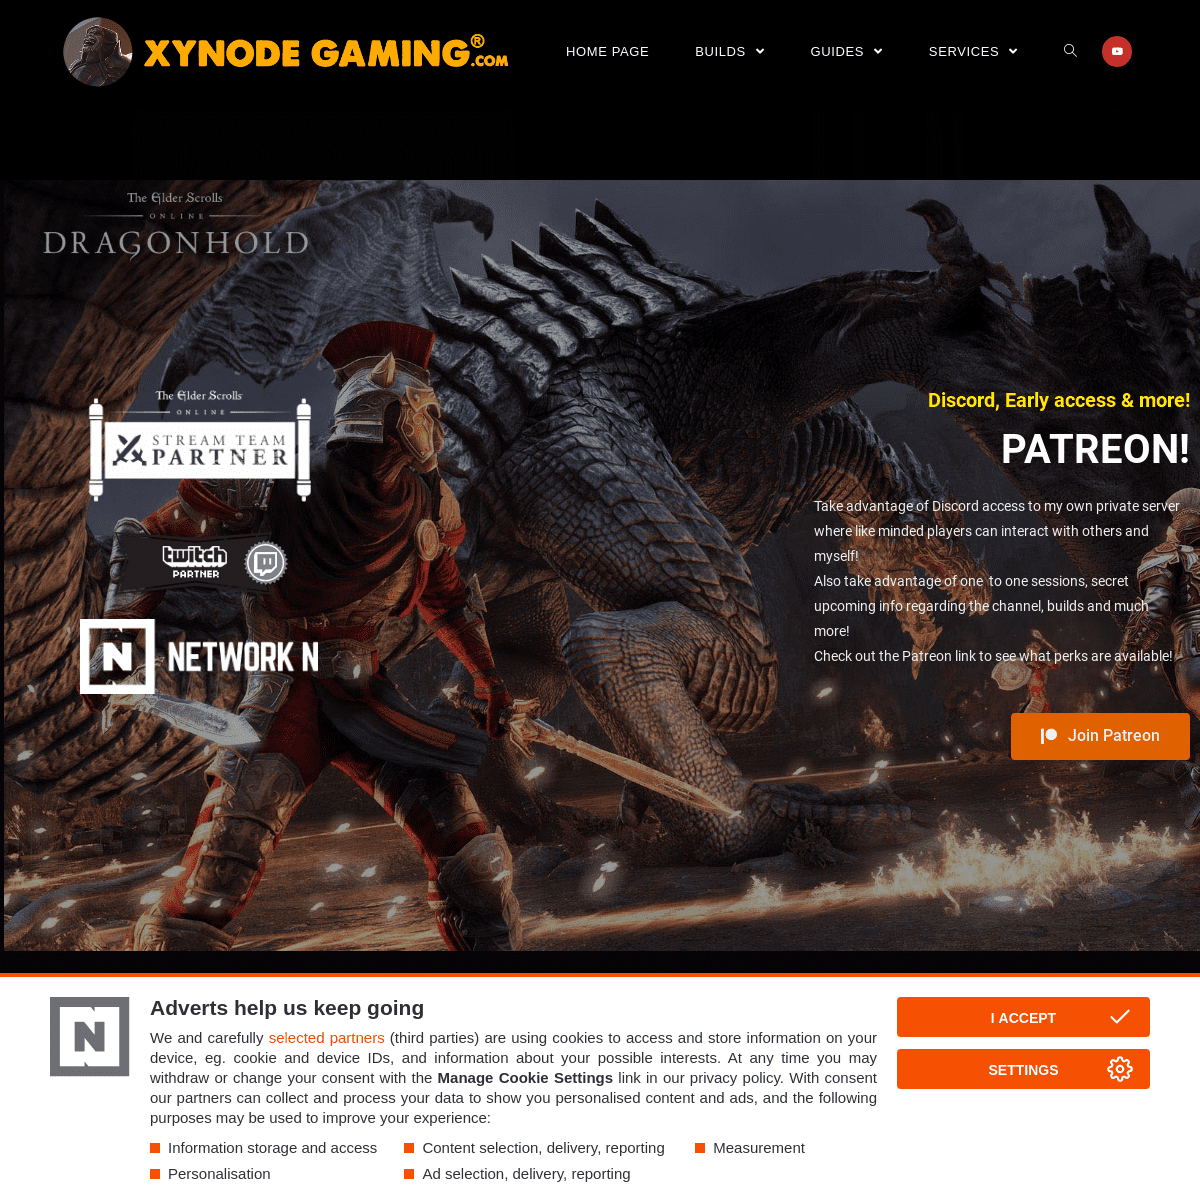 A complete backup of xynodegaming.com